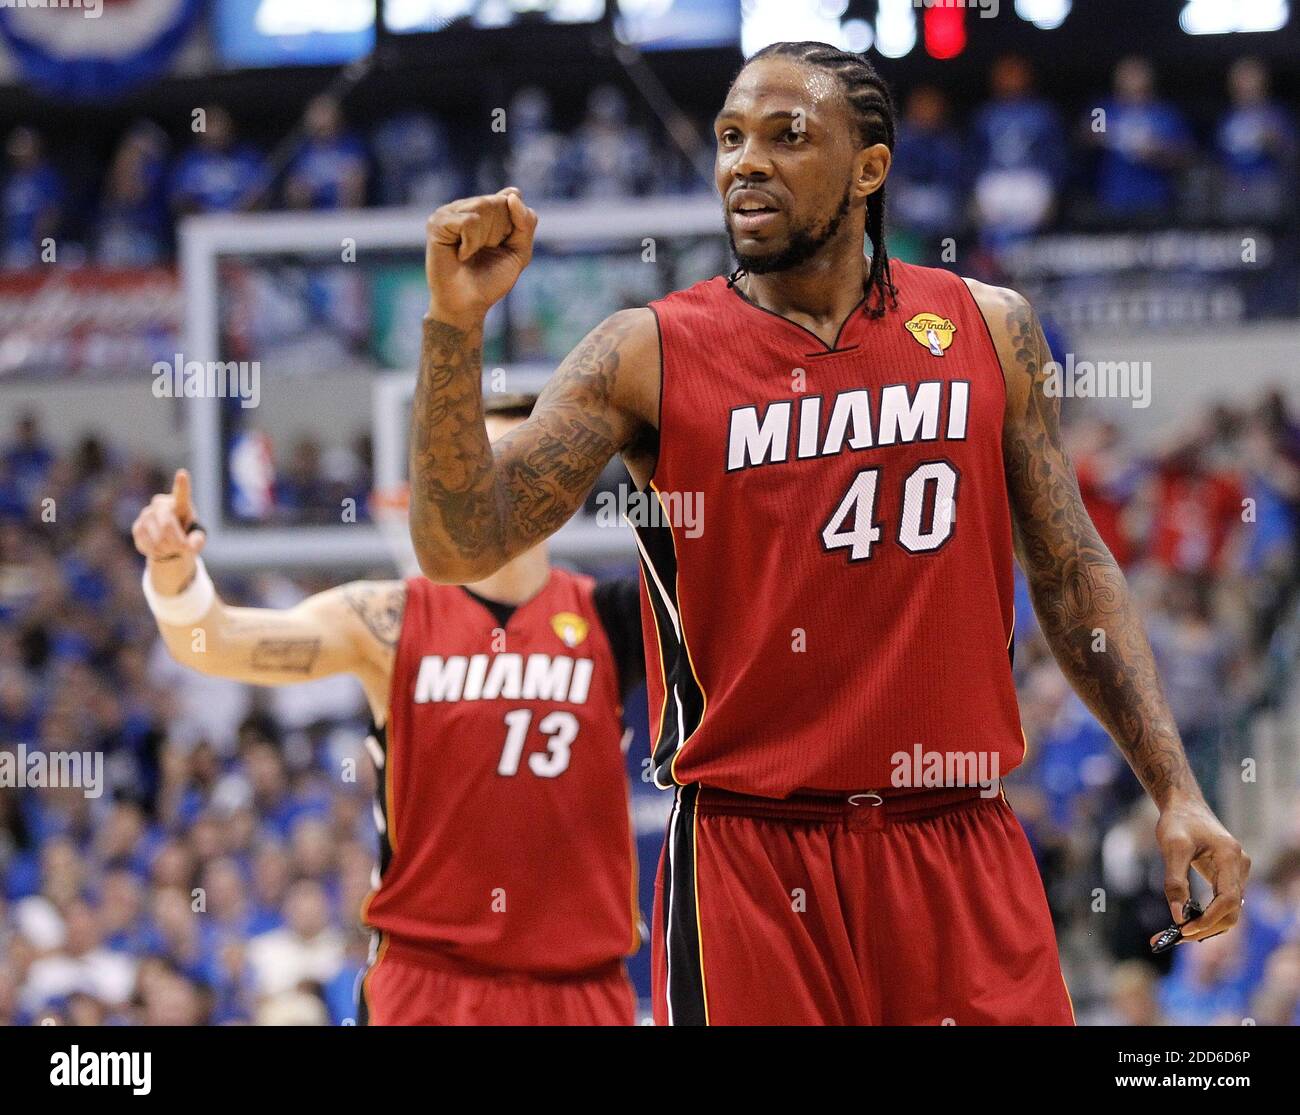 Udonis Haslem Net Worth: How much money did the Miami Heat